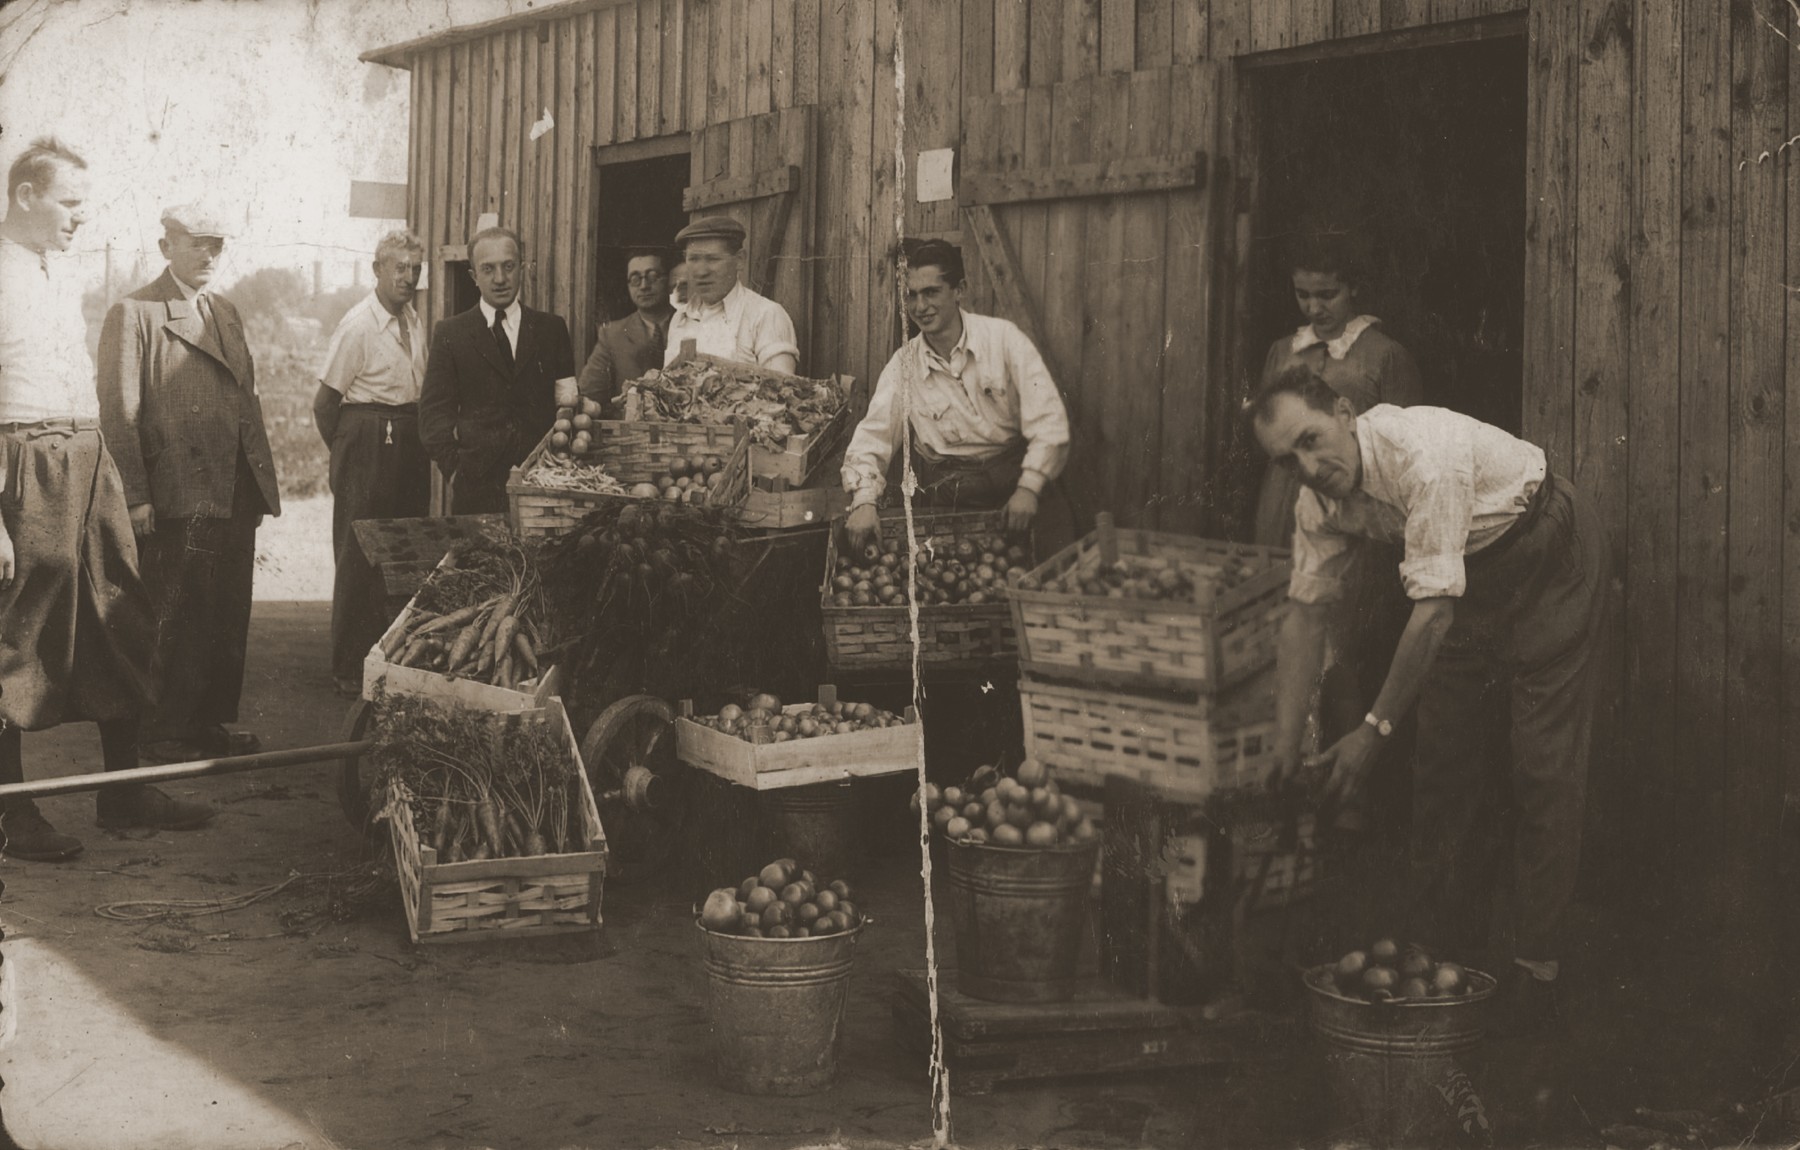 Jewish workers put out their produce in boxes and pails in front of a wooden shed.